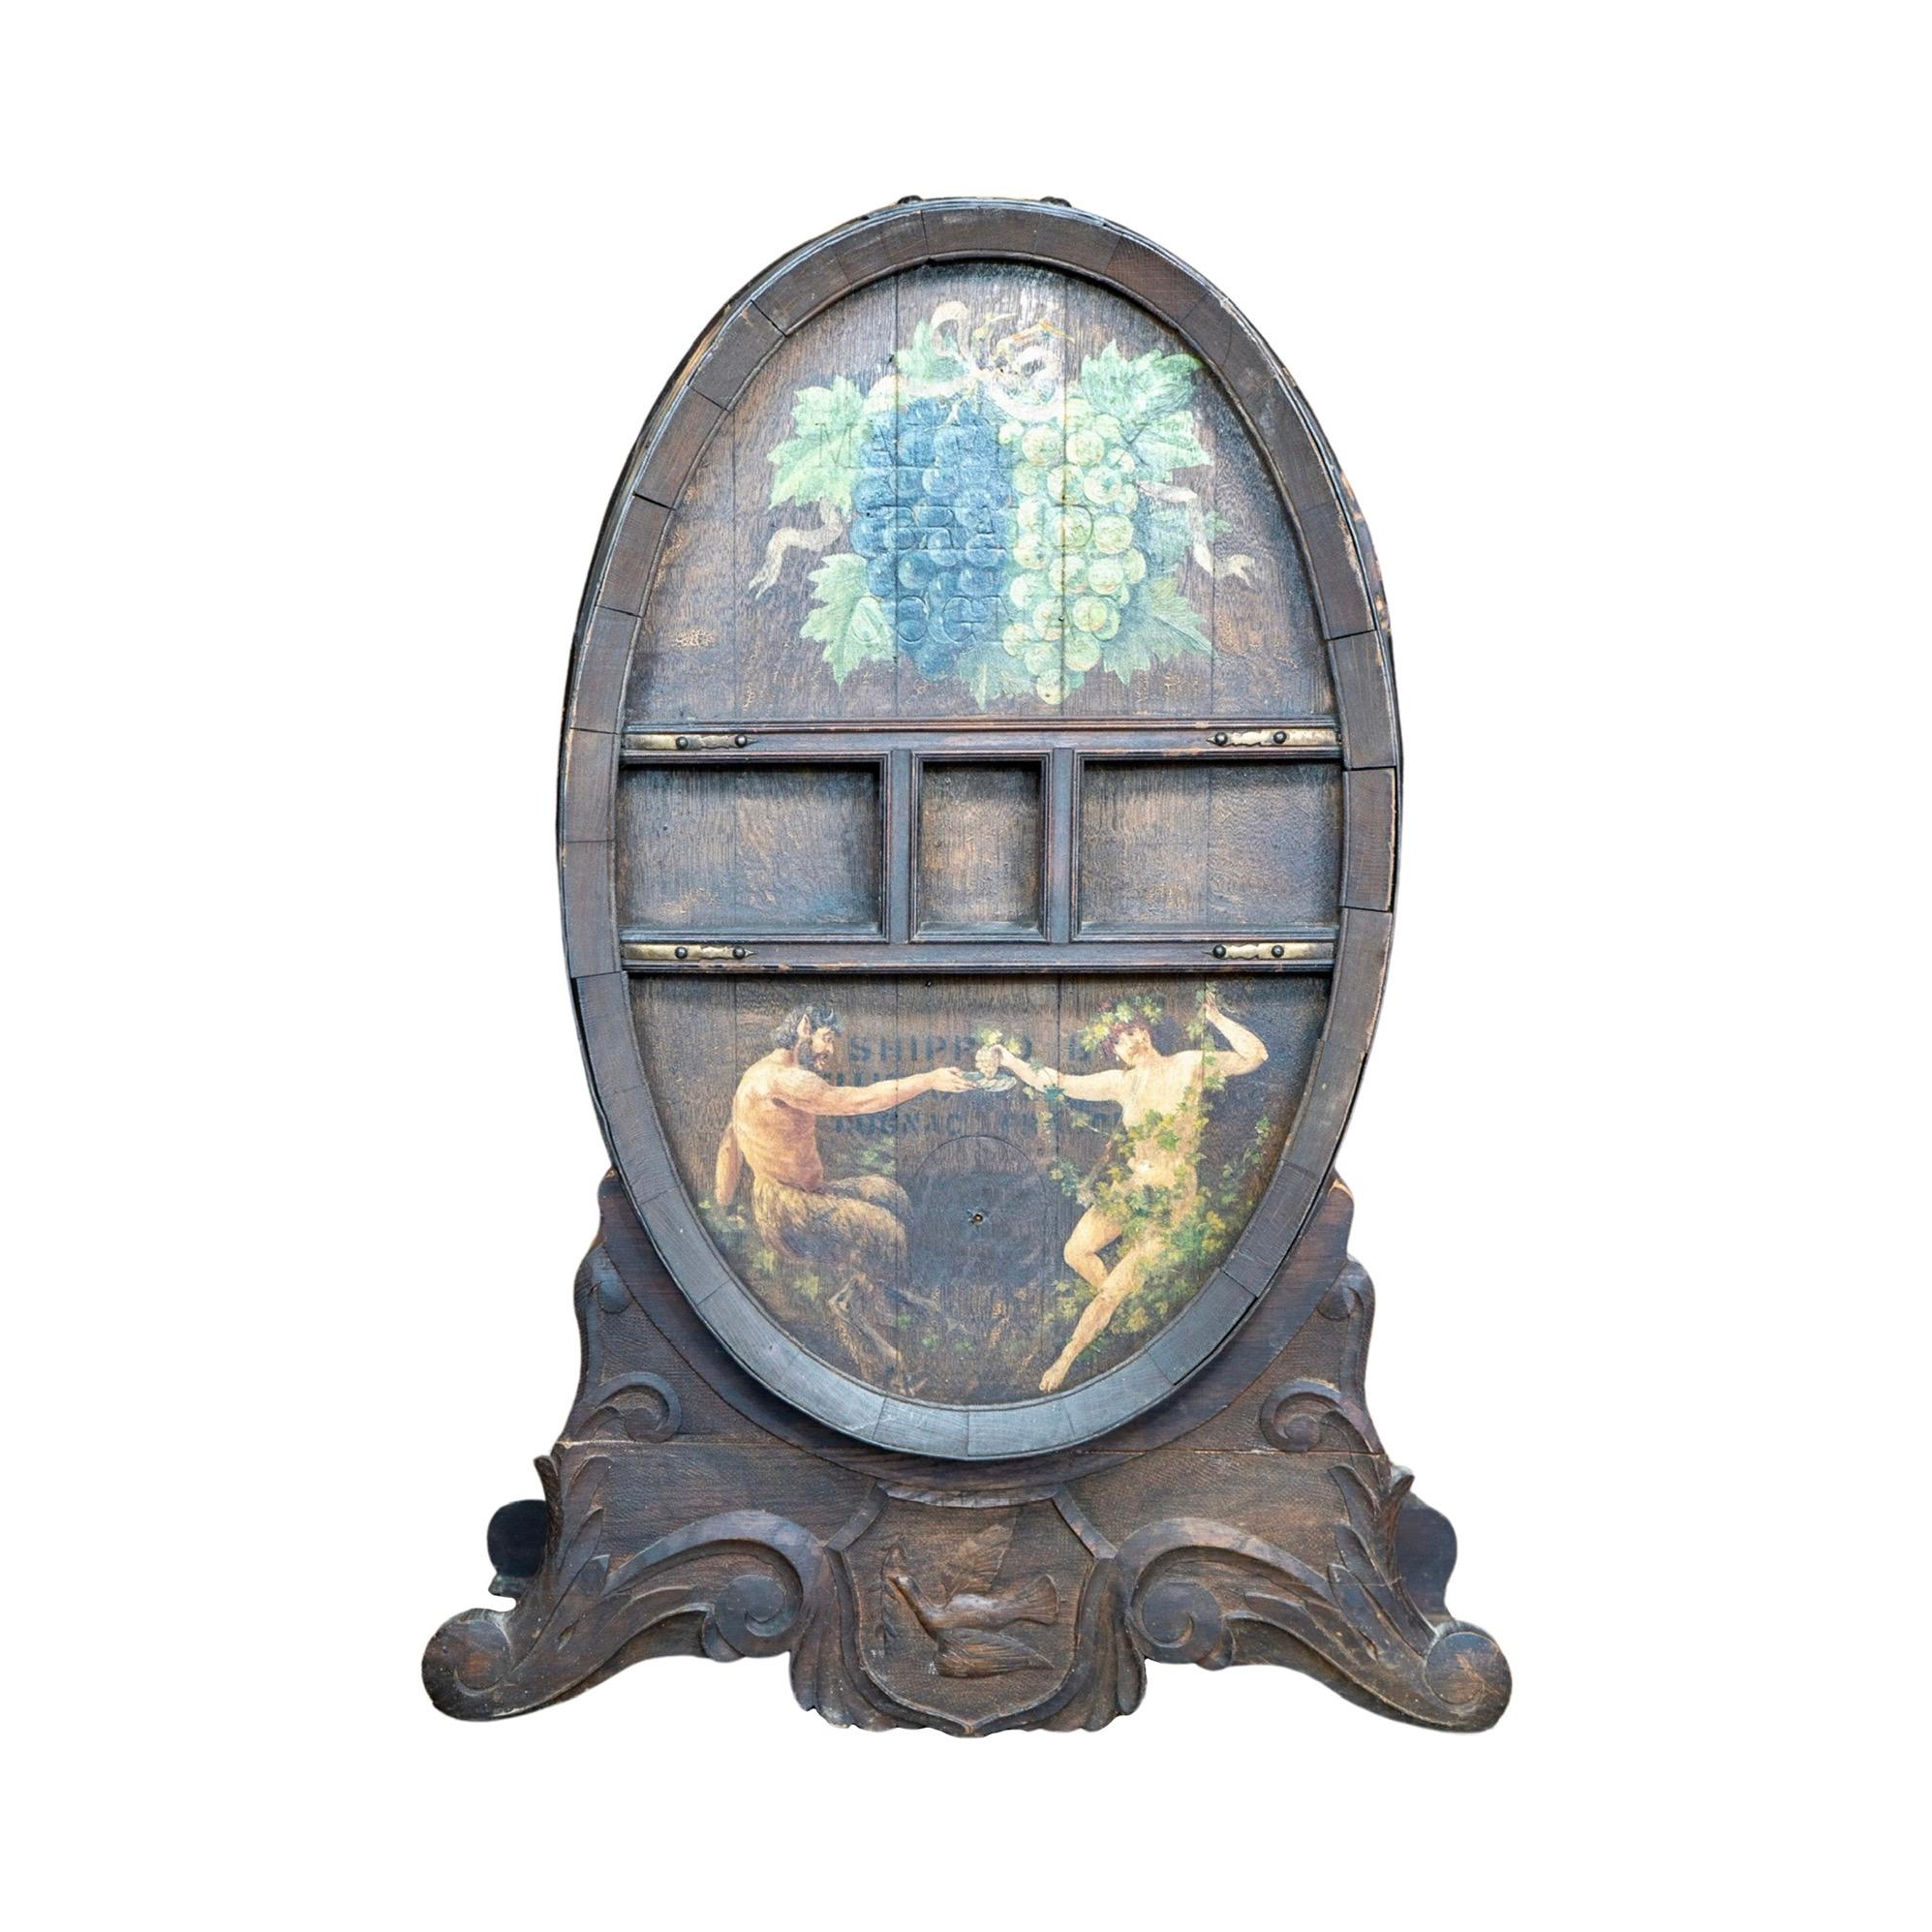 This French Wooden Cognac Barrel is a unique and ornamental piece perfect for any liquor enthusiast. Made from high-quality wood, it features a decorative mural of grapes and a festive scene of a Satyr and a Maenad. The fitted stand can be separated